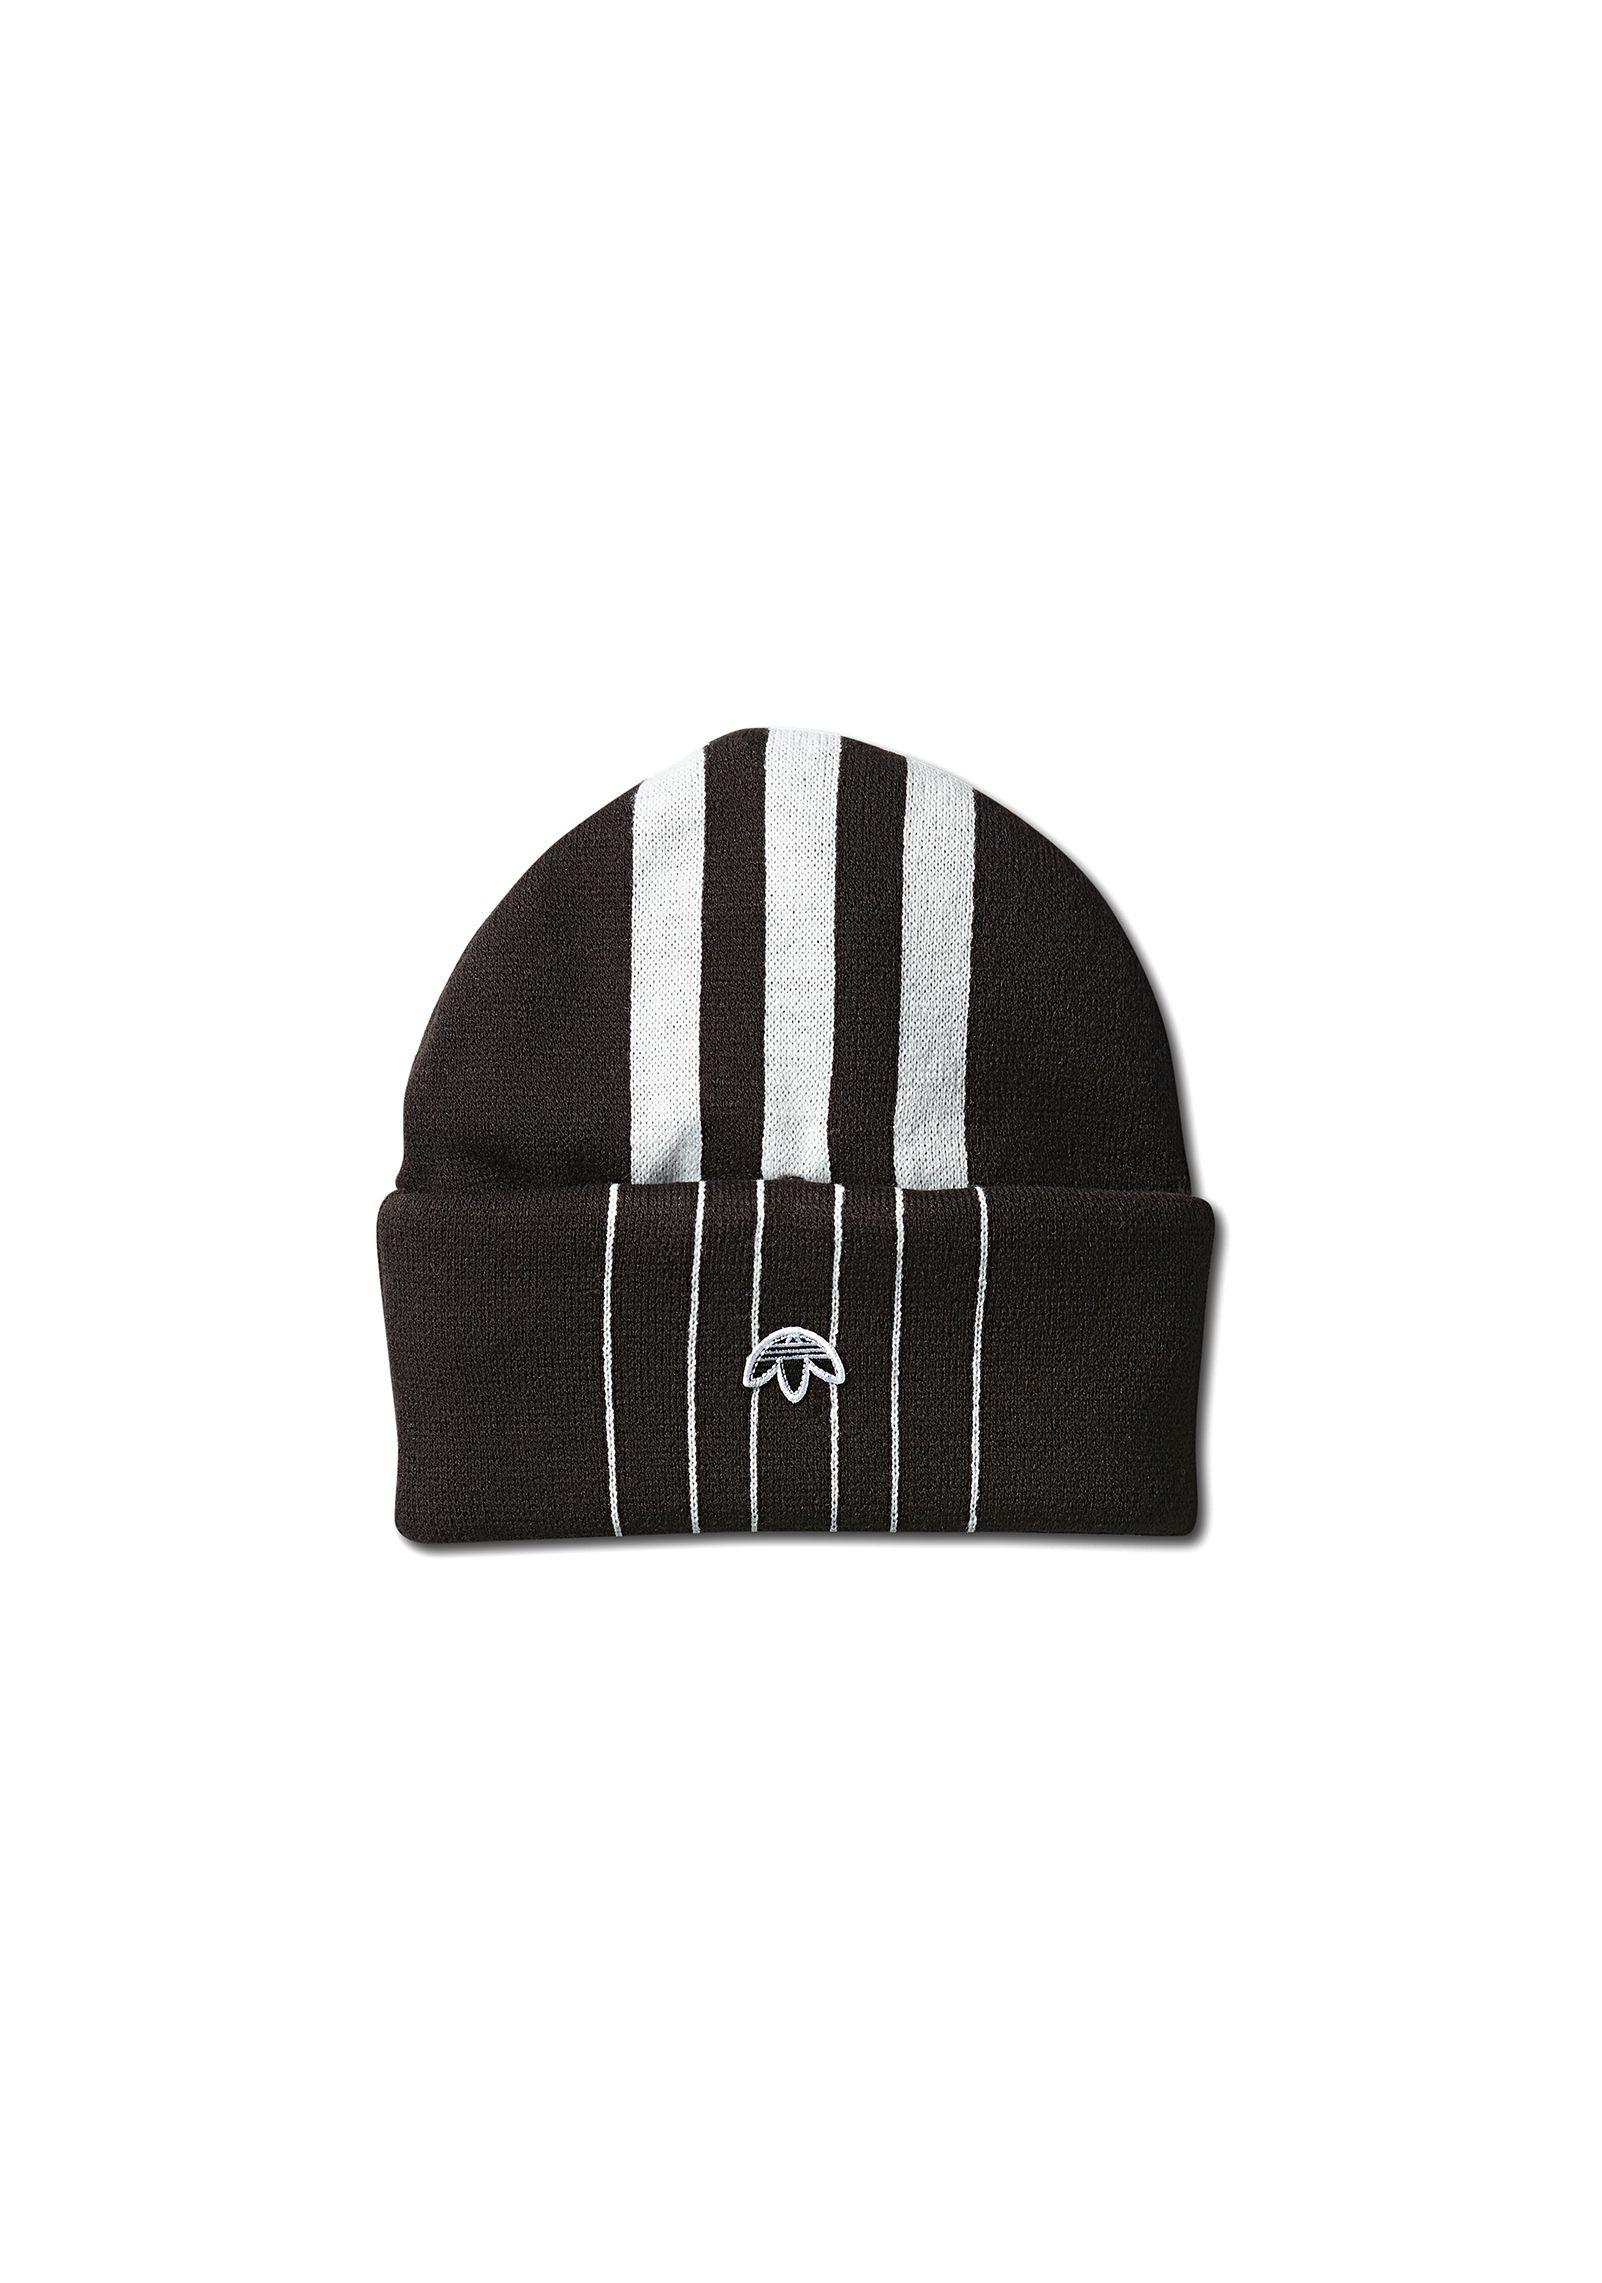 Alexander Wang Leather Adidas Originals By Aw Mask Beanie in Black/White  (Black) | Lyst